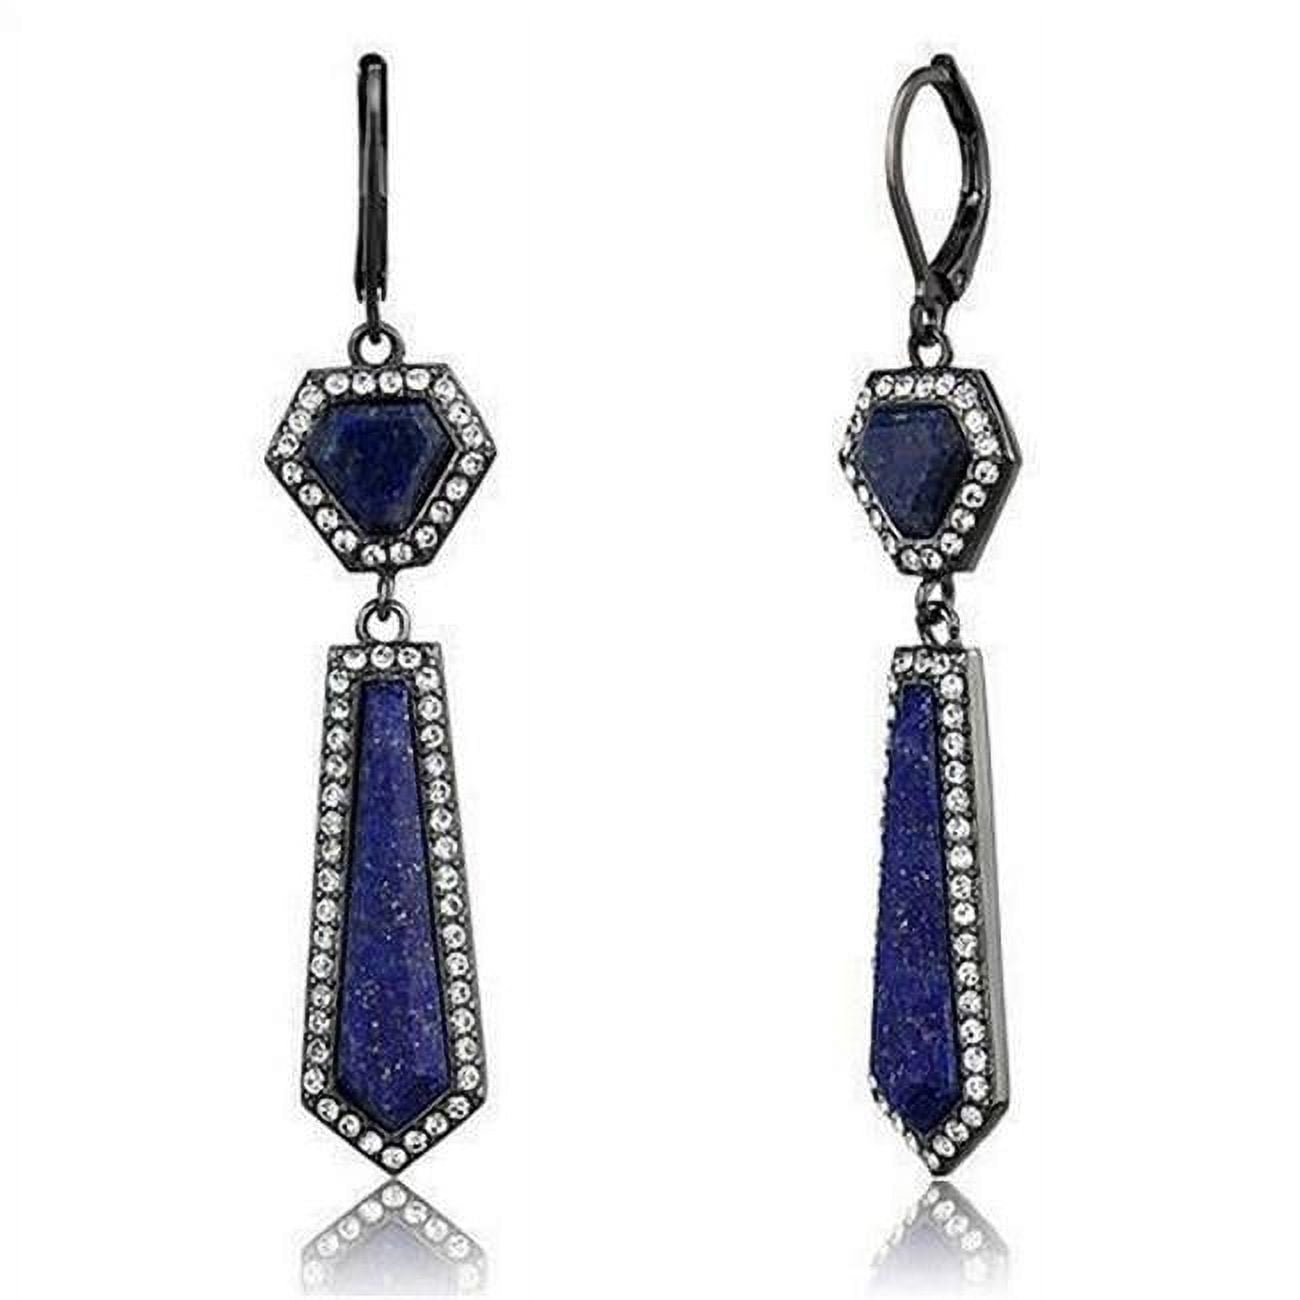 Picture of Alamode TK2723 IP Light Black IP Gun Stainless Steel Earrings with Precious Stone Lapis, Montana Blue